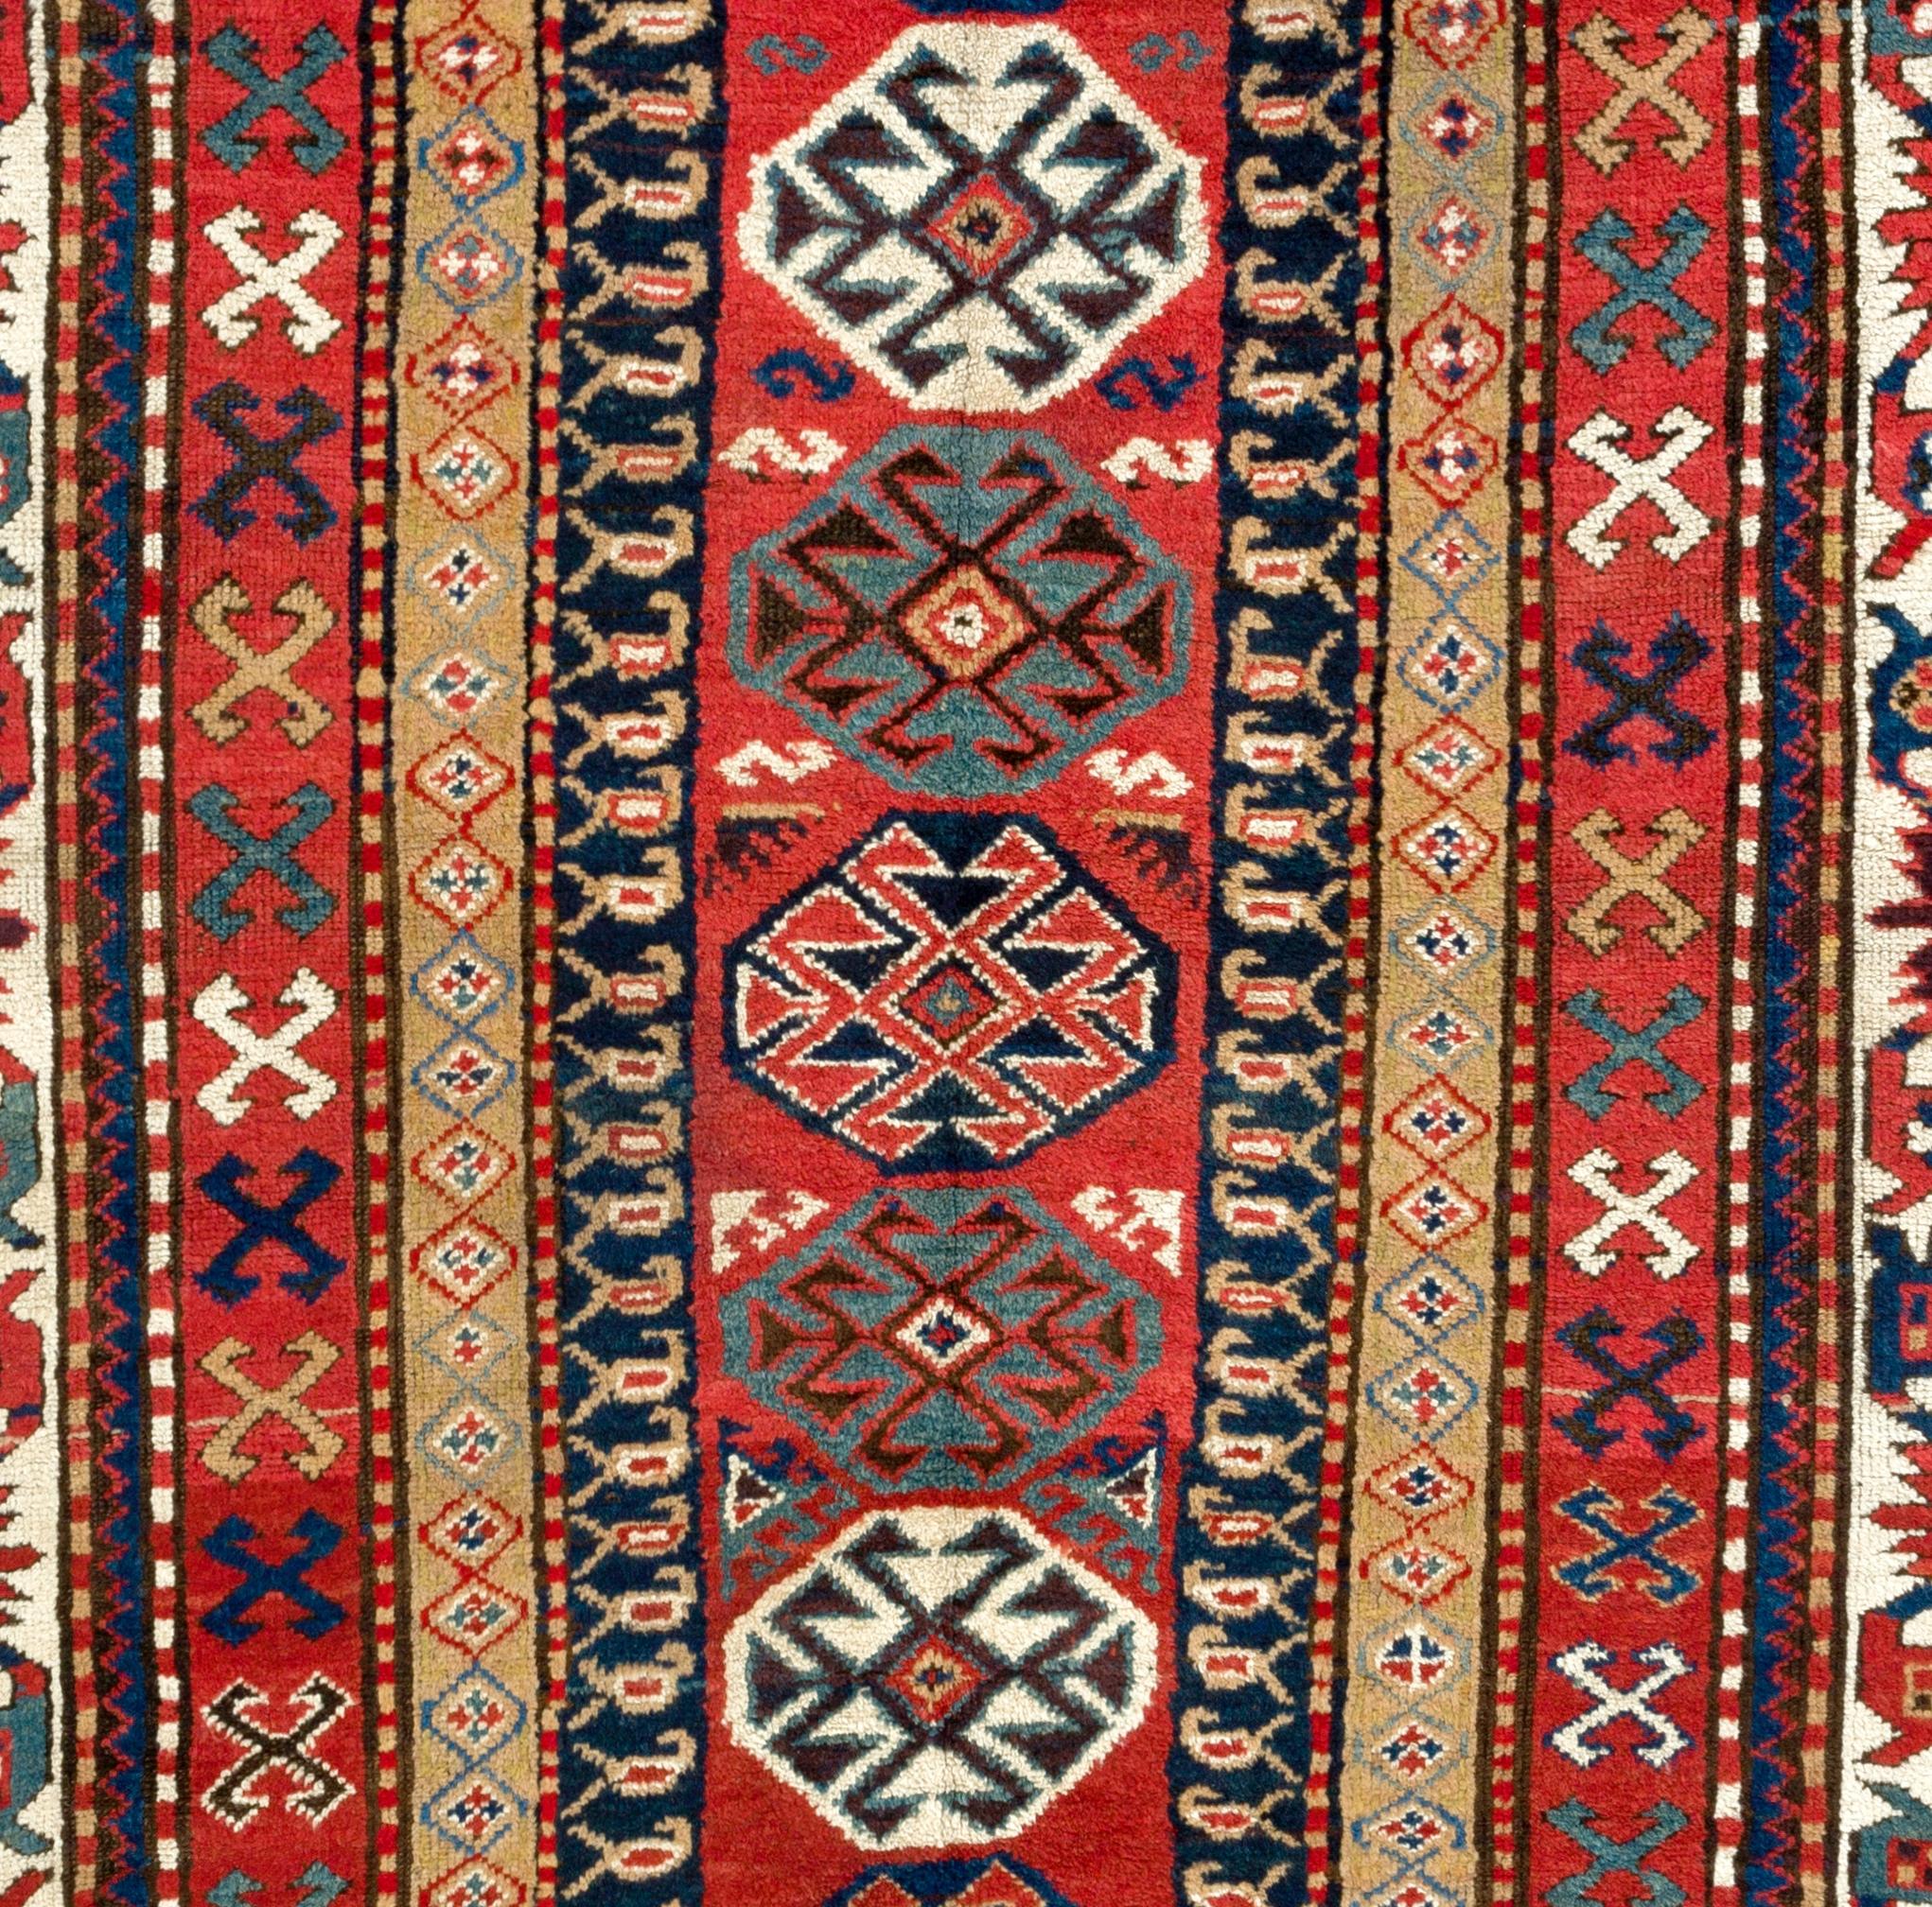 Antique Caucasian Kazak rug, circa 1870. Excellent original condition. Sturdy and as clean as a brand new rug (deep washed professionally).
DIMENSIONS: 5'3'' x 8'3'' (158 x 251 cm)